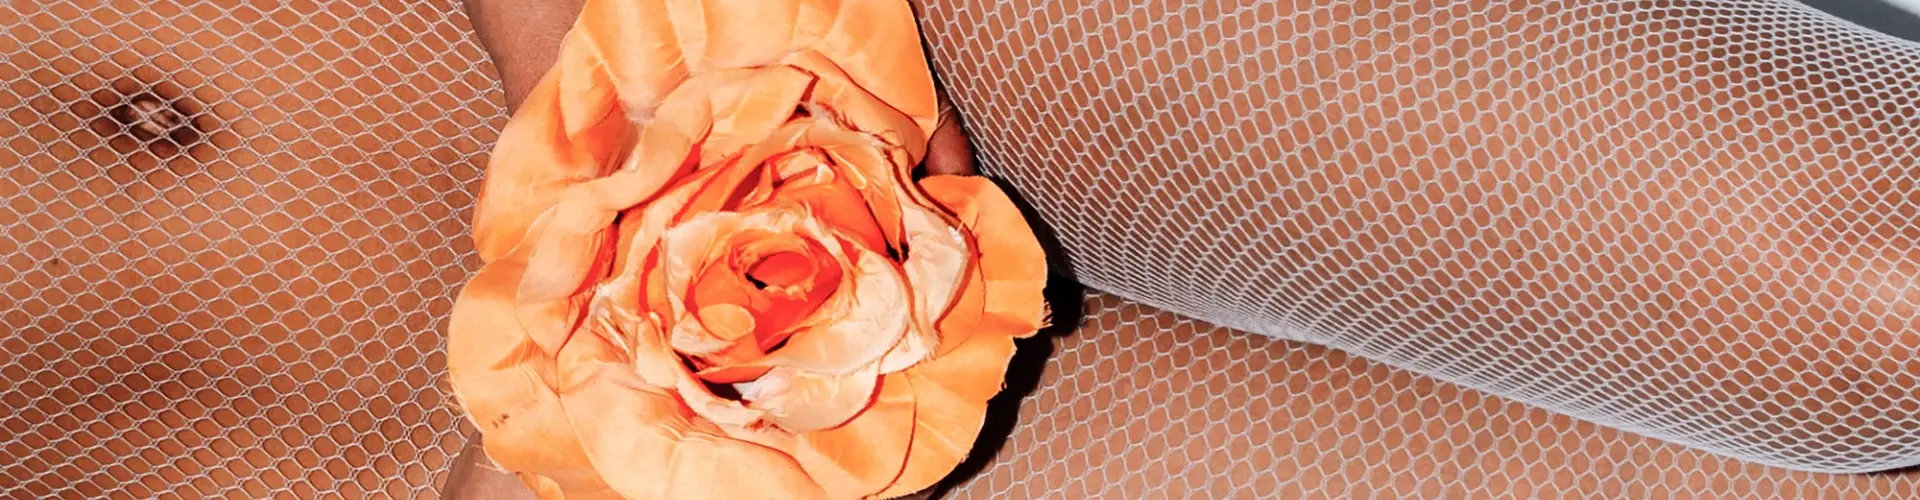 A close up of a woman in fishnet stockings with a flower.